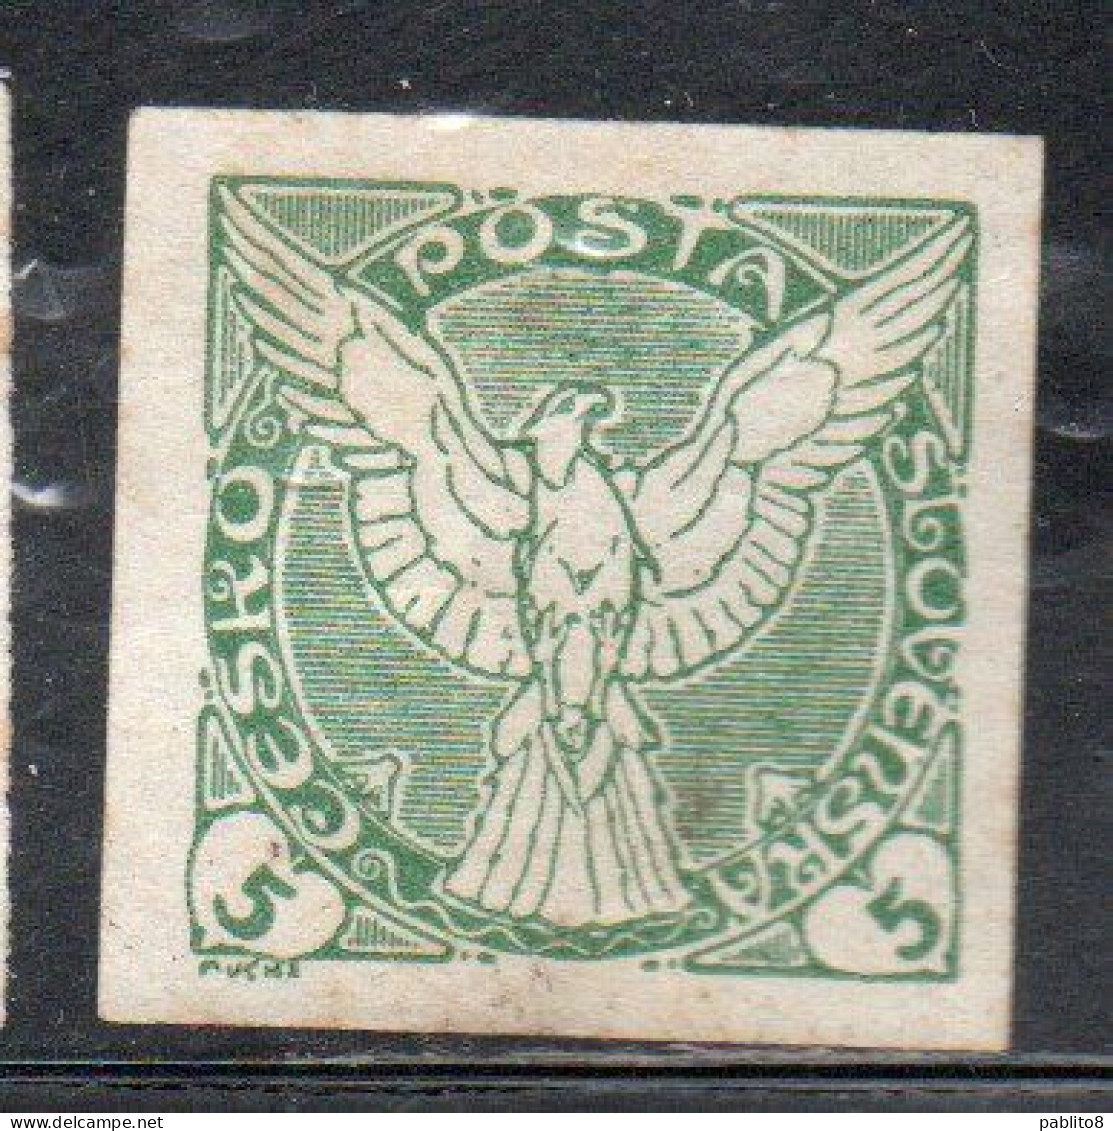 CZECHOSLOVAKIA CESKA CECOSLOVACCHIA 1918 1920 IMPERF. NEWSPAPER STAMPS WINDHOVER 5h MH - Newspaper Stamps